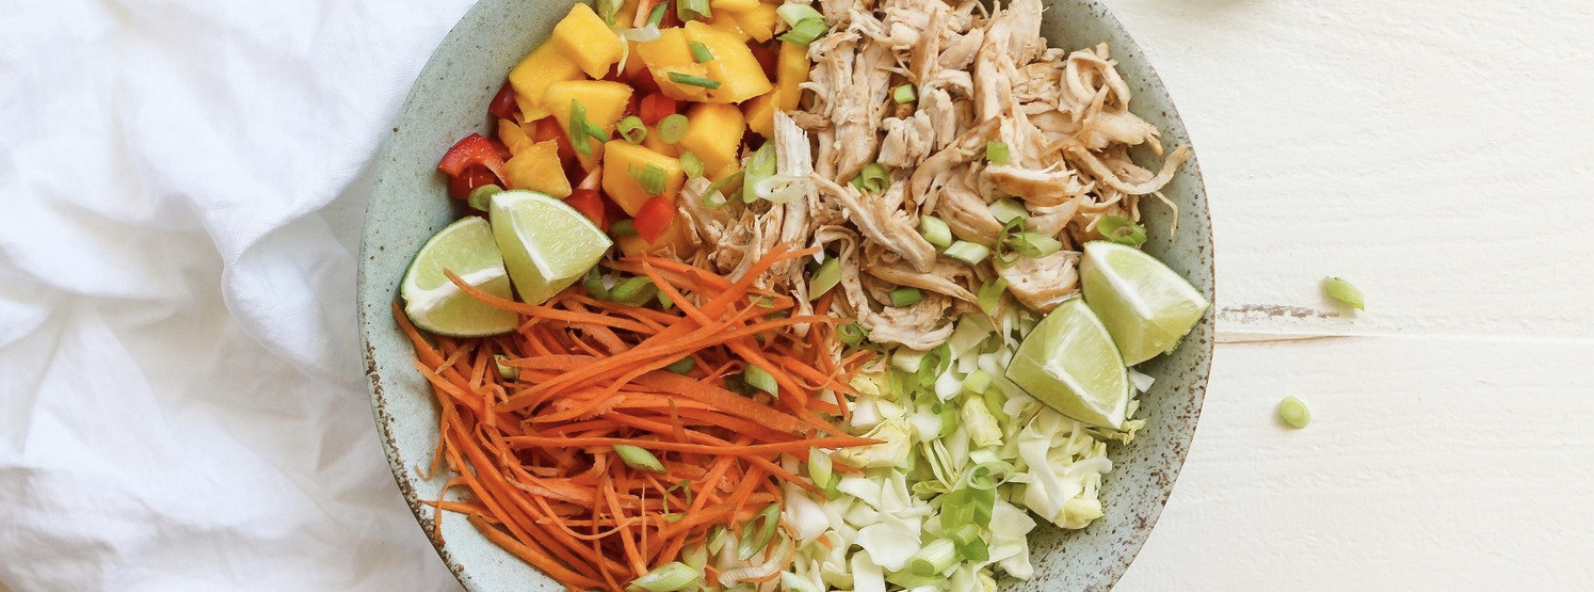 thai chopped chicken salad with peanut sauce, carrots, lime